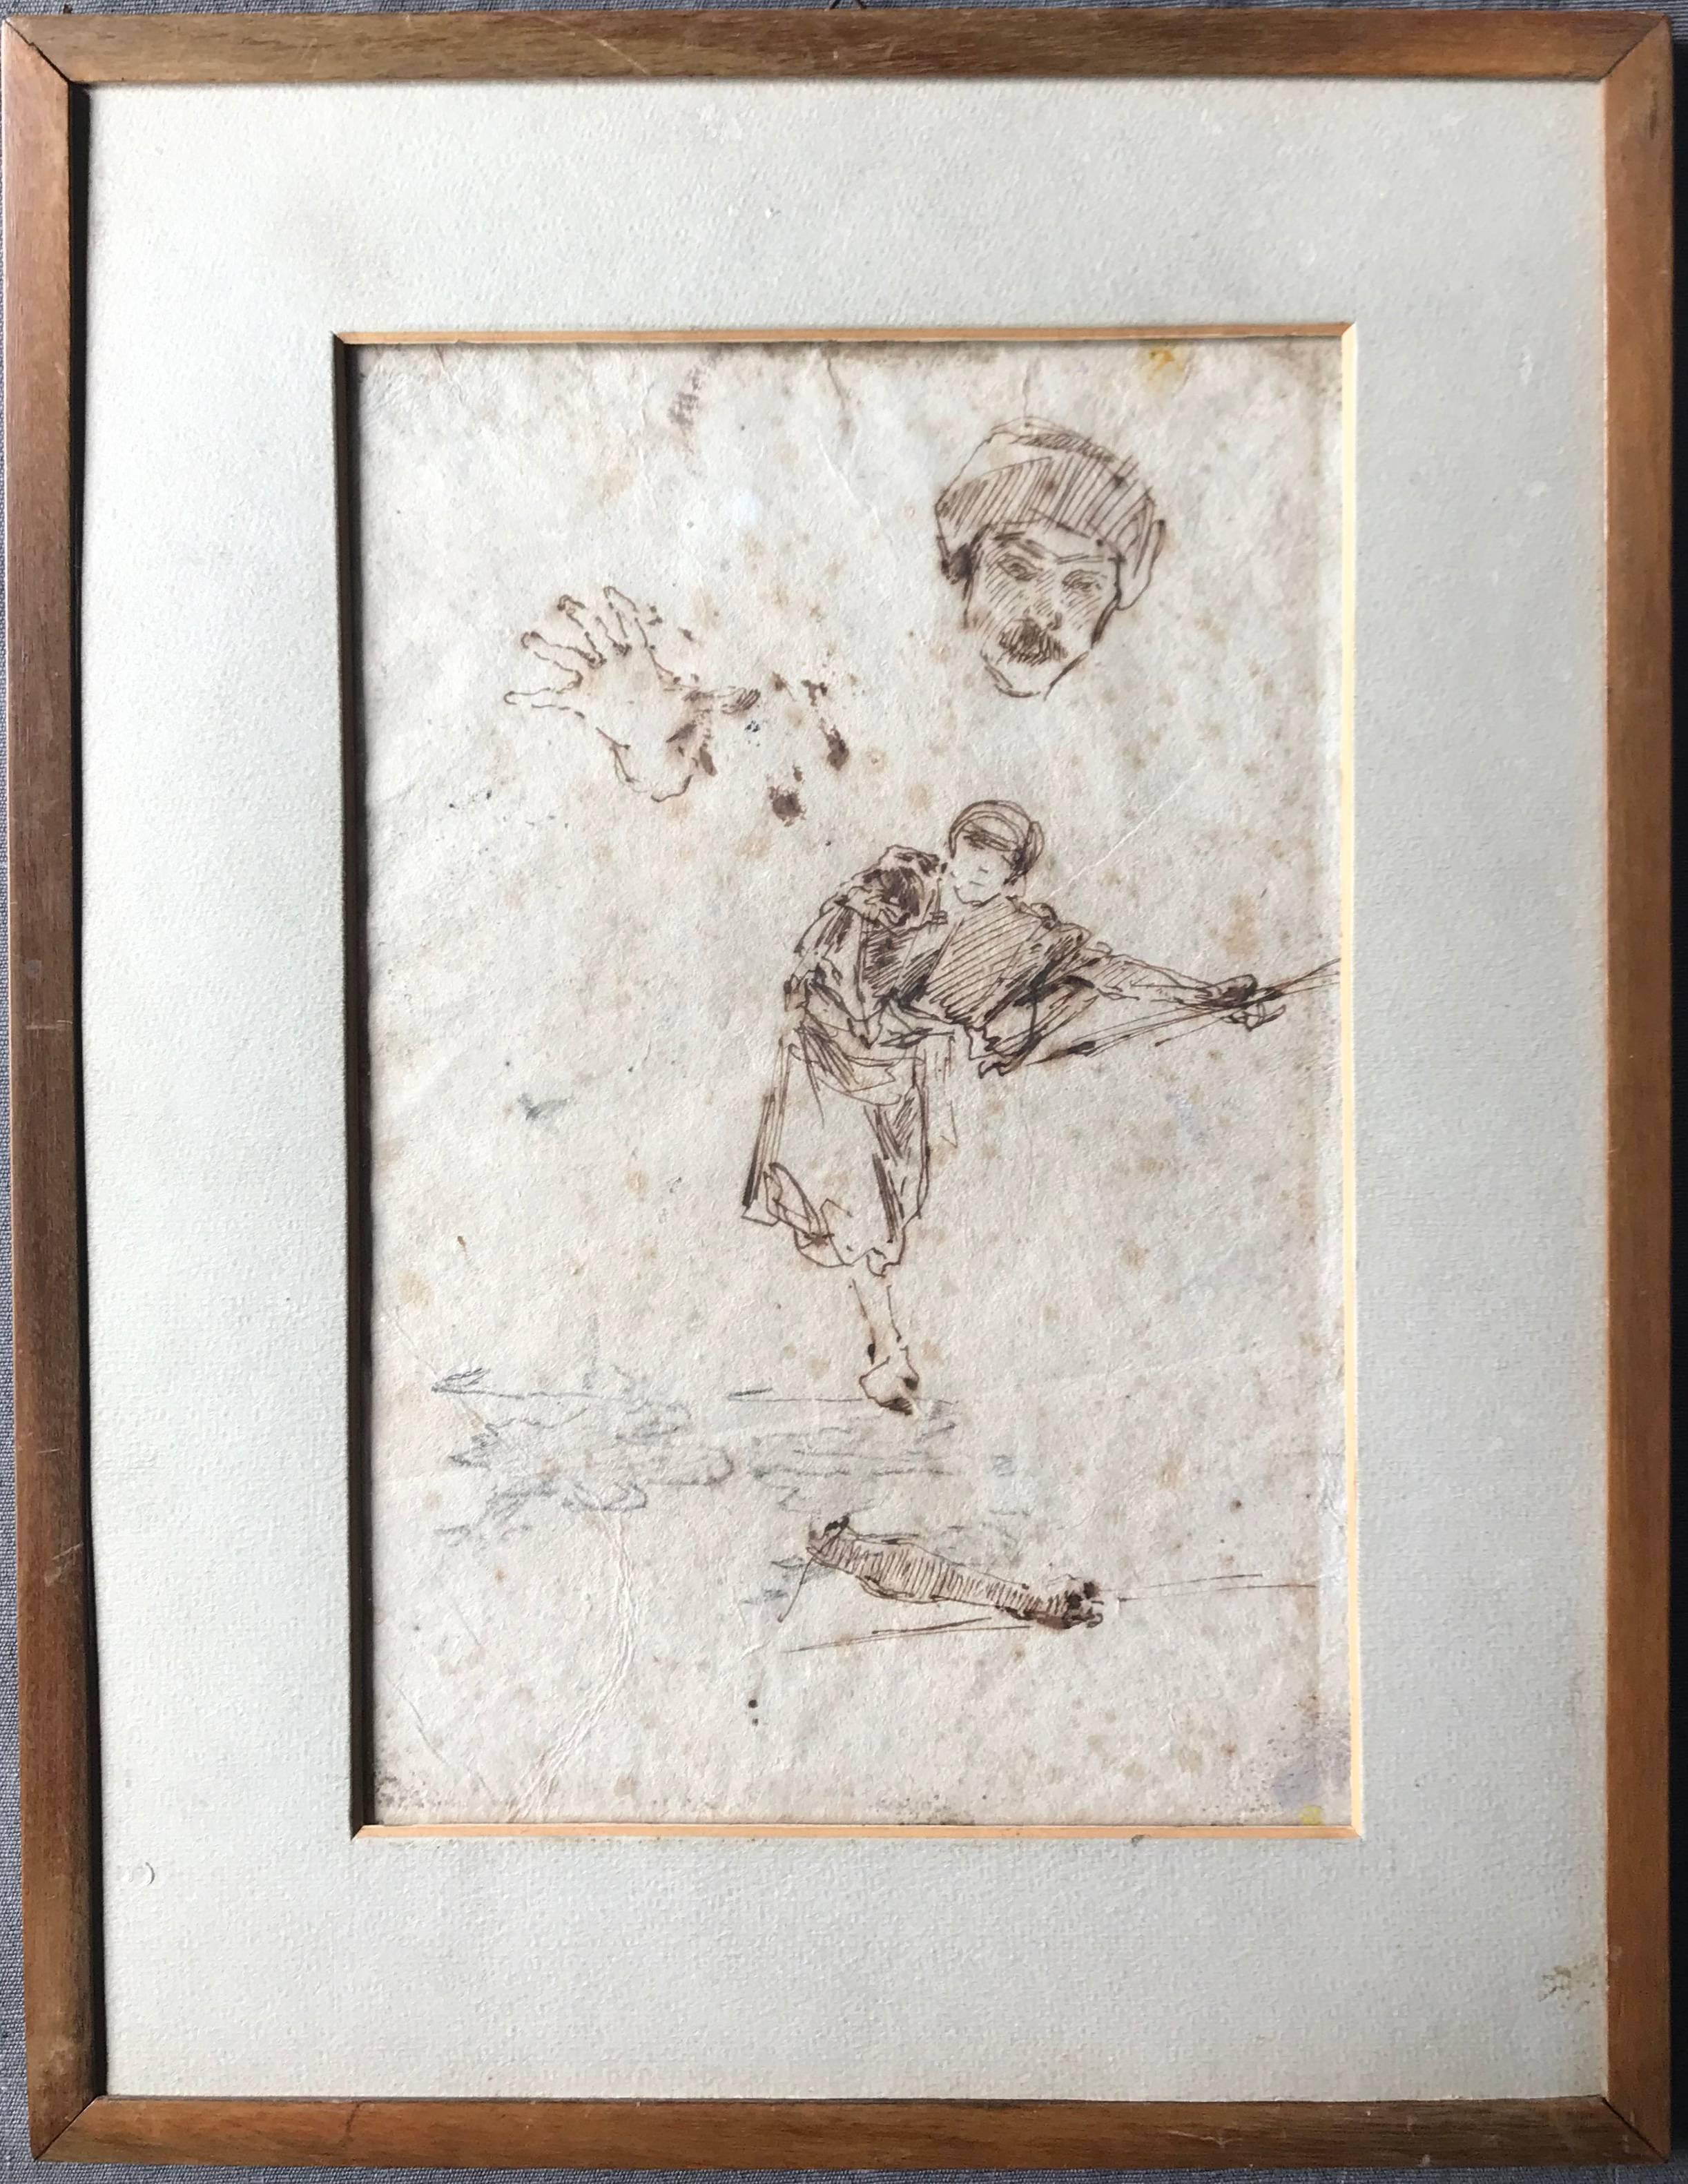 Giuseppe Casciaro, Venetian figure study. Framed ink drawing of a Venetian gondolier with a hand and head study; with inscription and date on reverse with Casciaro's studio stamp, Italy, 1927.
Dimensions: 16